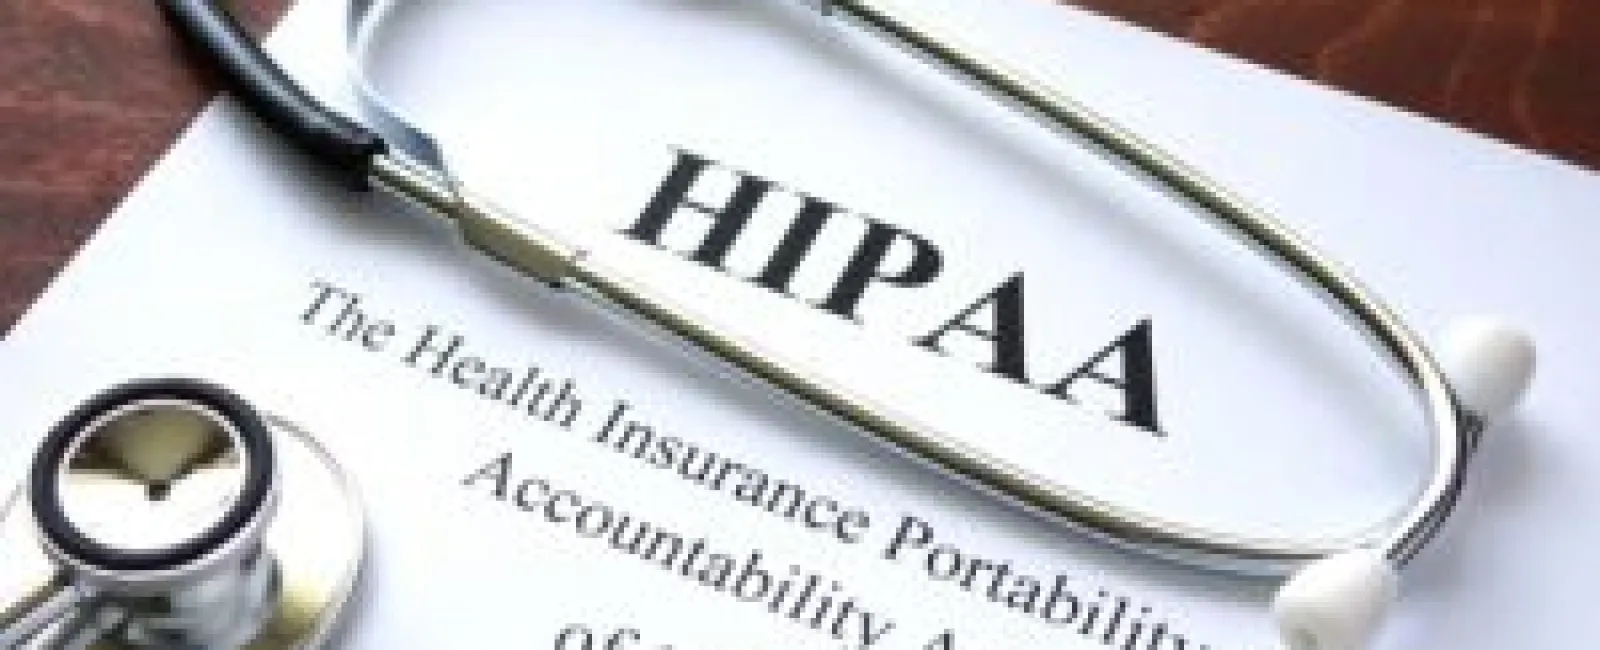 Summary of Provisions in Proposed Modifications to the HIPAA Privacy Rule